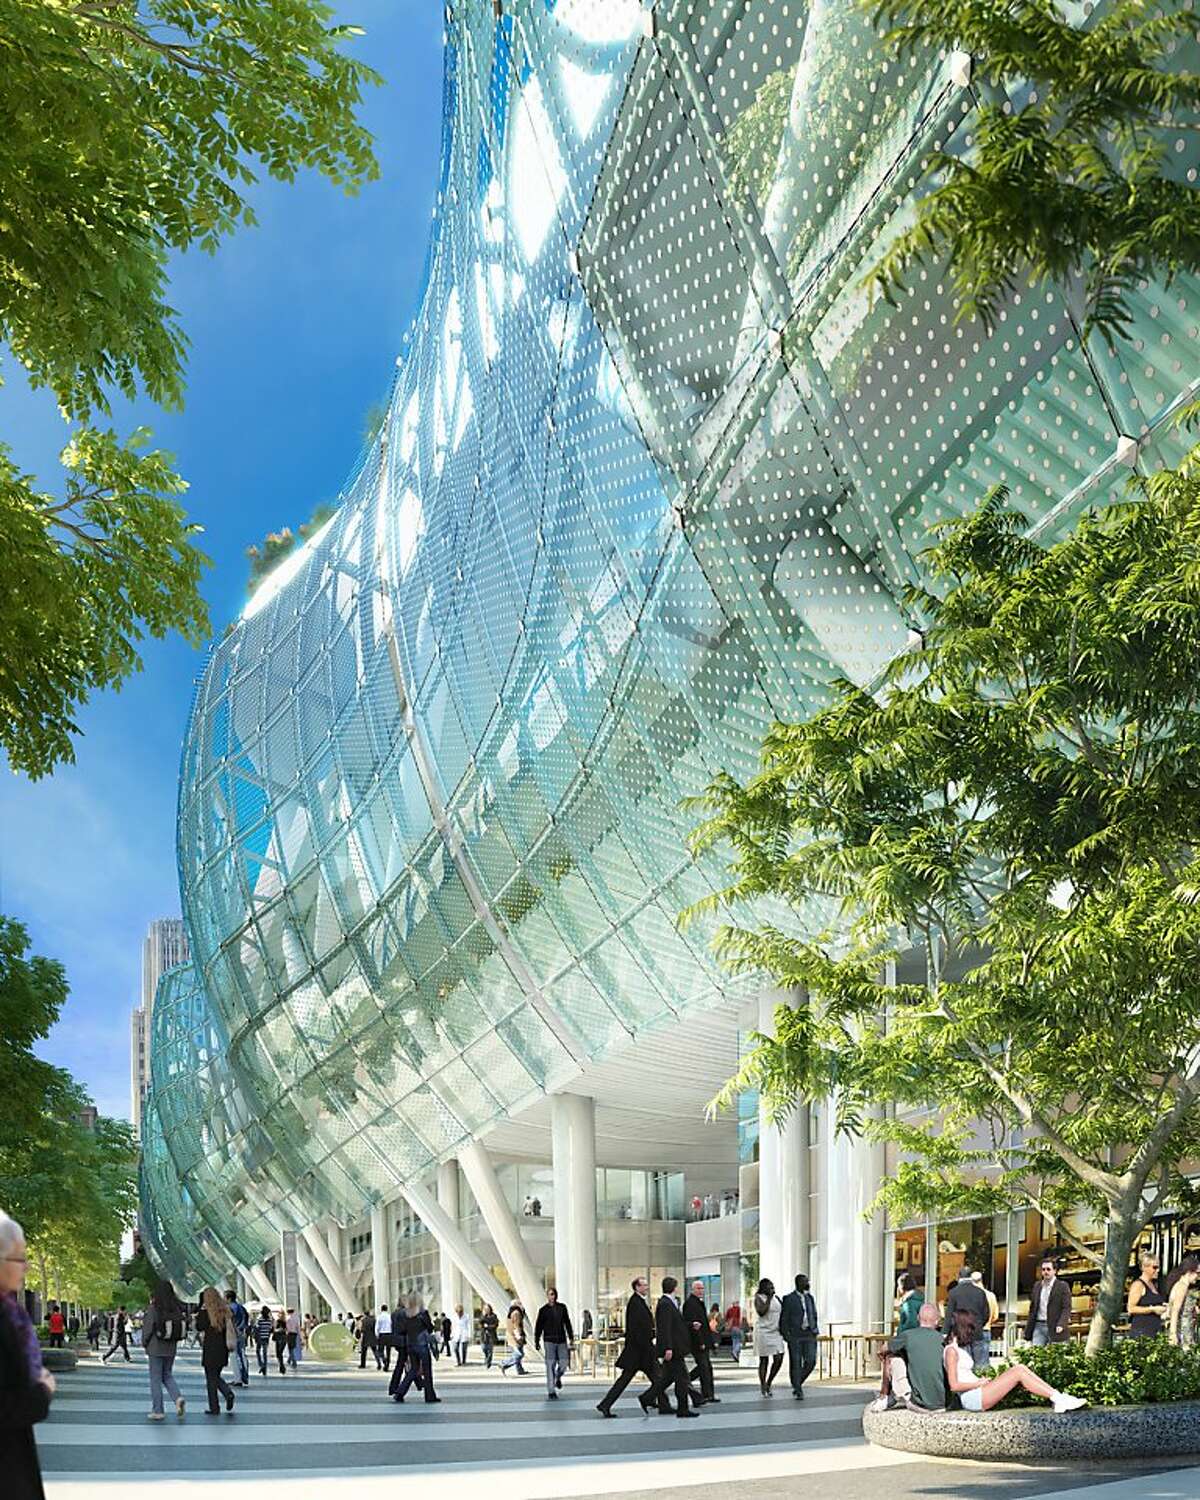 The 2010 design of the new Transbay Transit Center featured an all glass skin, as in this view along Beale Street. The architects are now proposing a see-through skin of aluminum instead to trim costs.